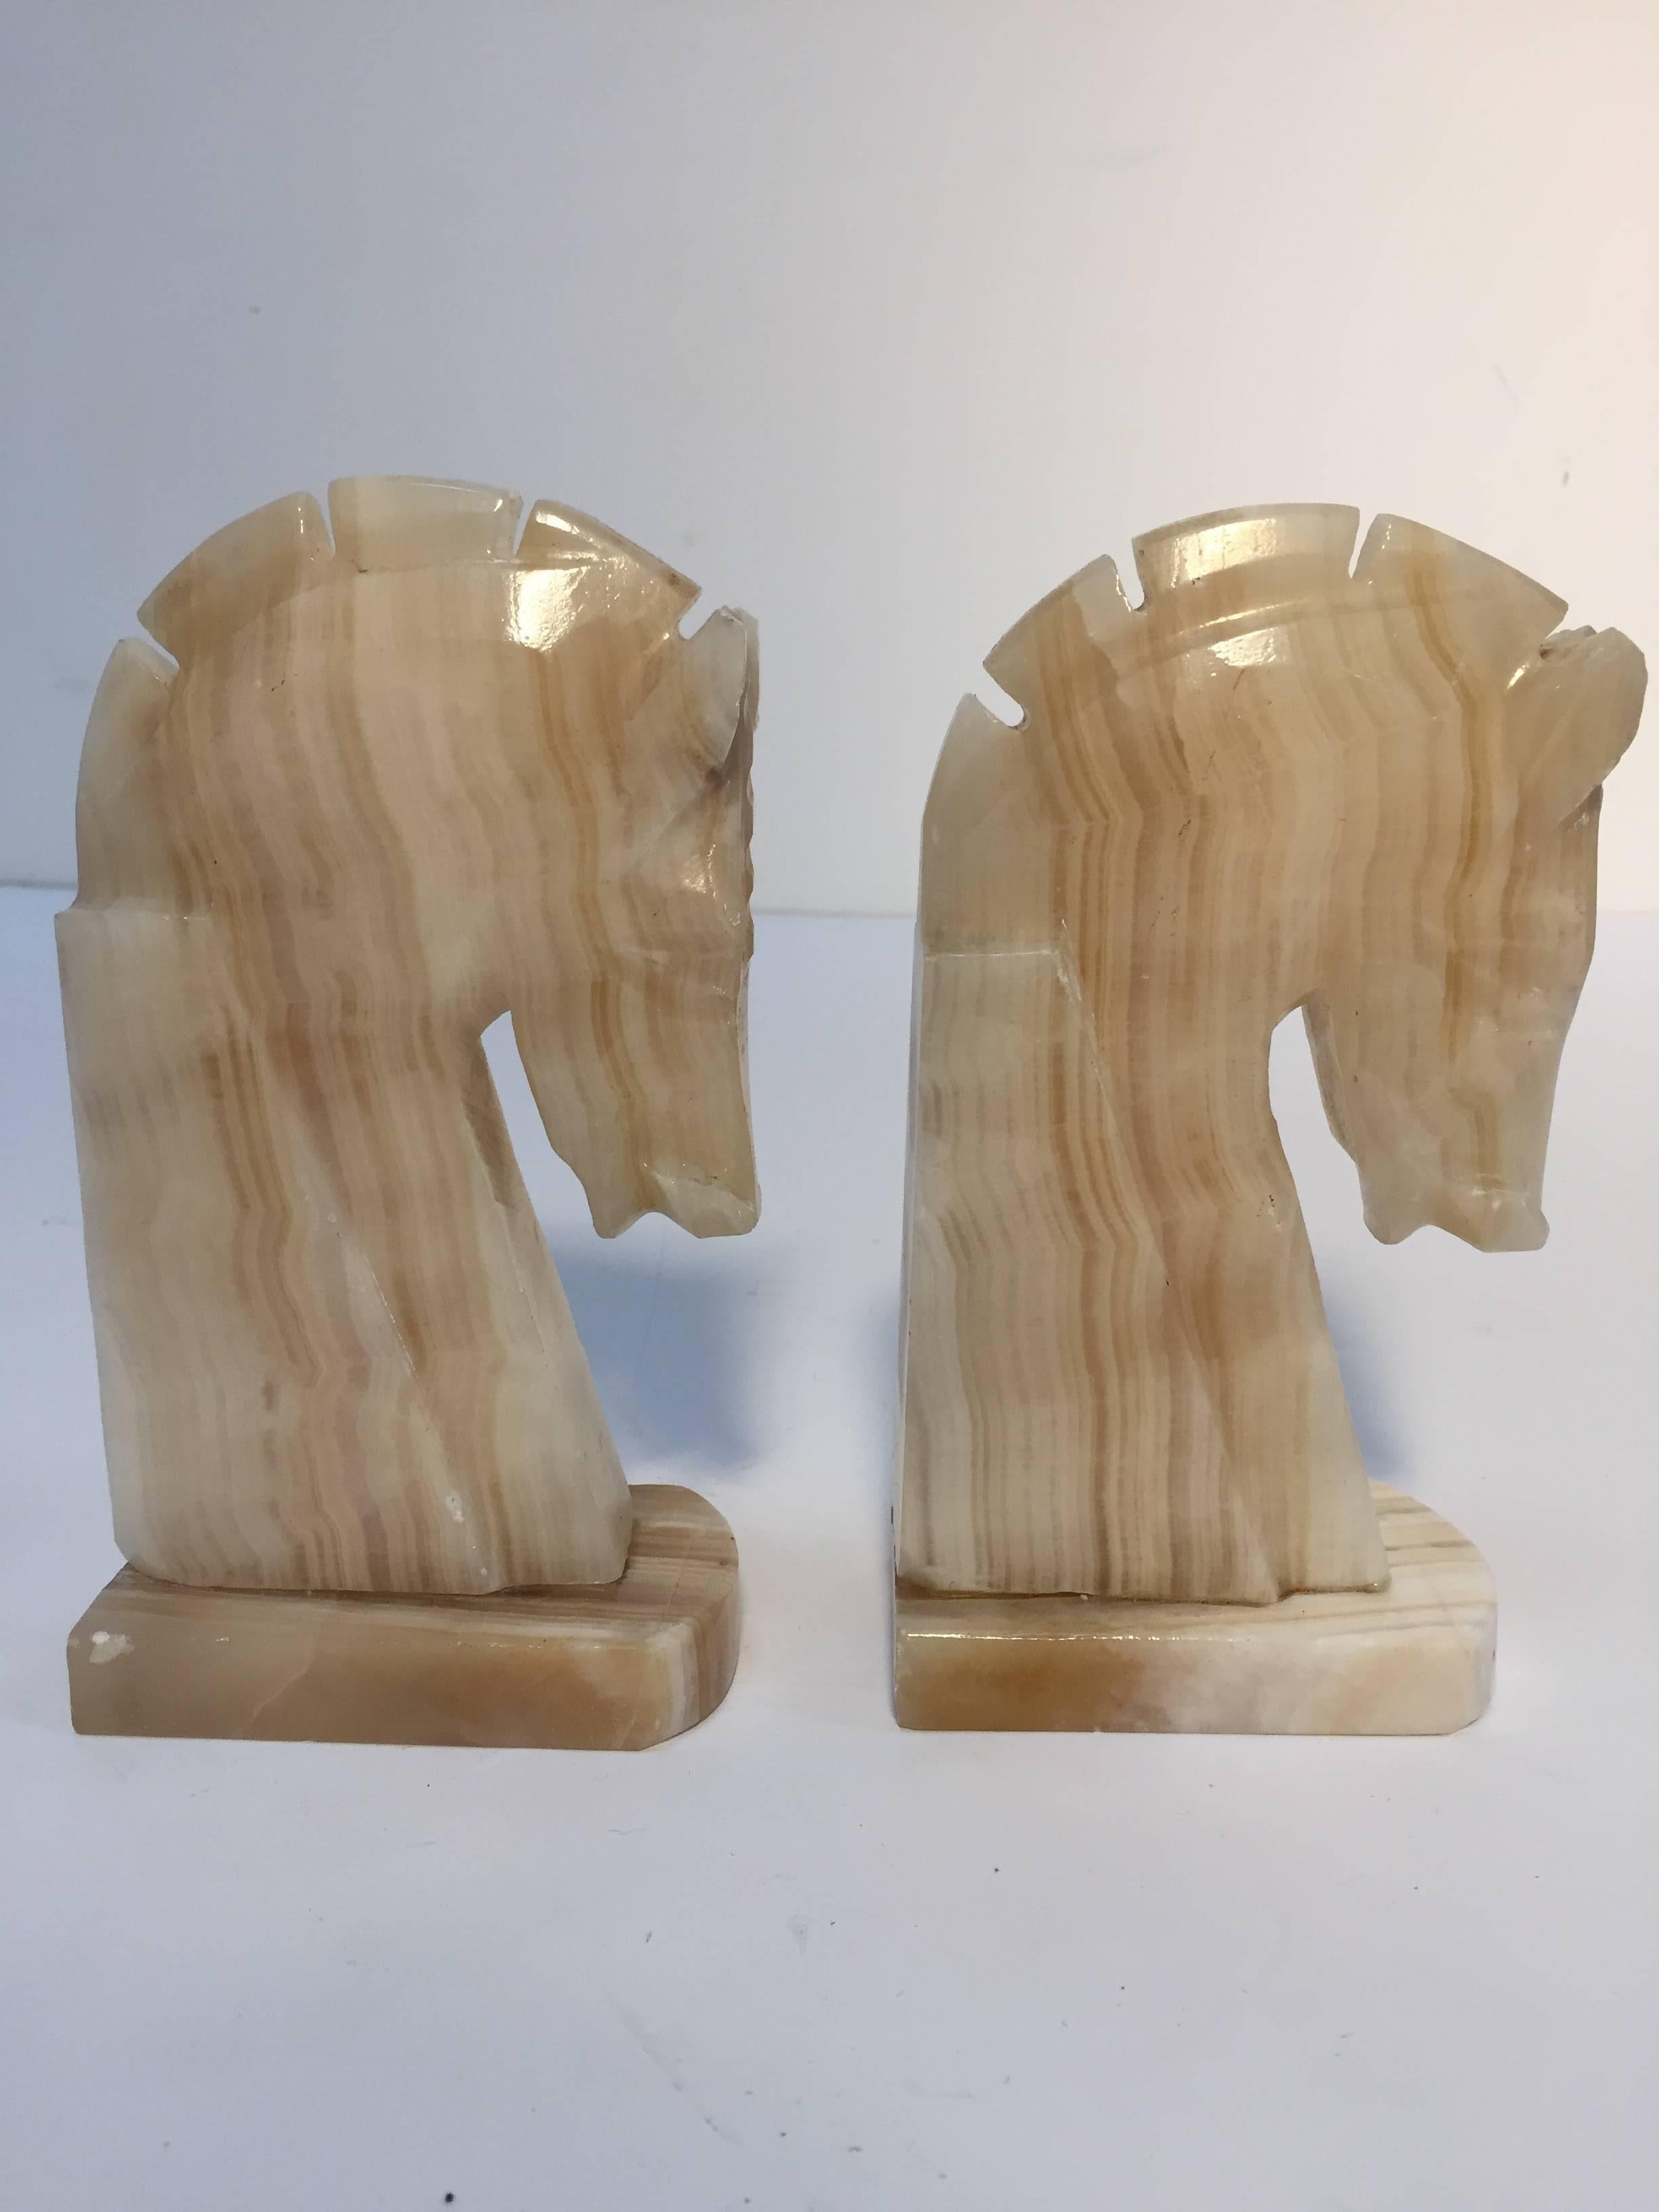 Pair of Art Deco style stylized horses head bookends. 
Vintage set of bookends, hand-carved in onyx in a shade of ivory and browns. 
Hermes style horses, great modern design. 
Measures: Each horse head measure 7.5